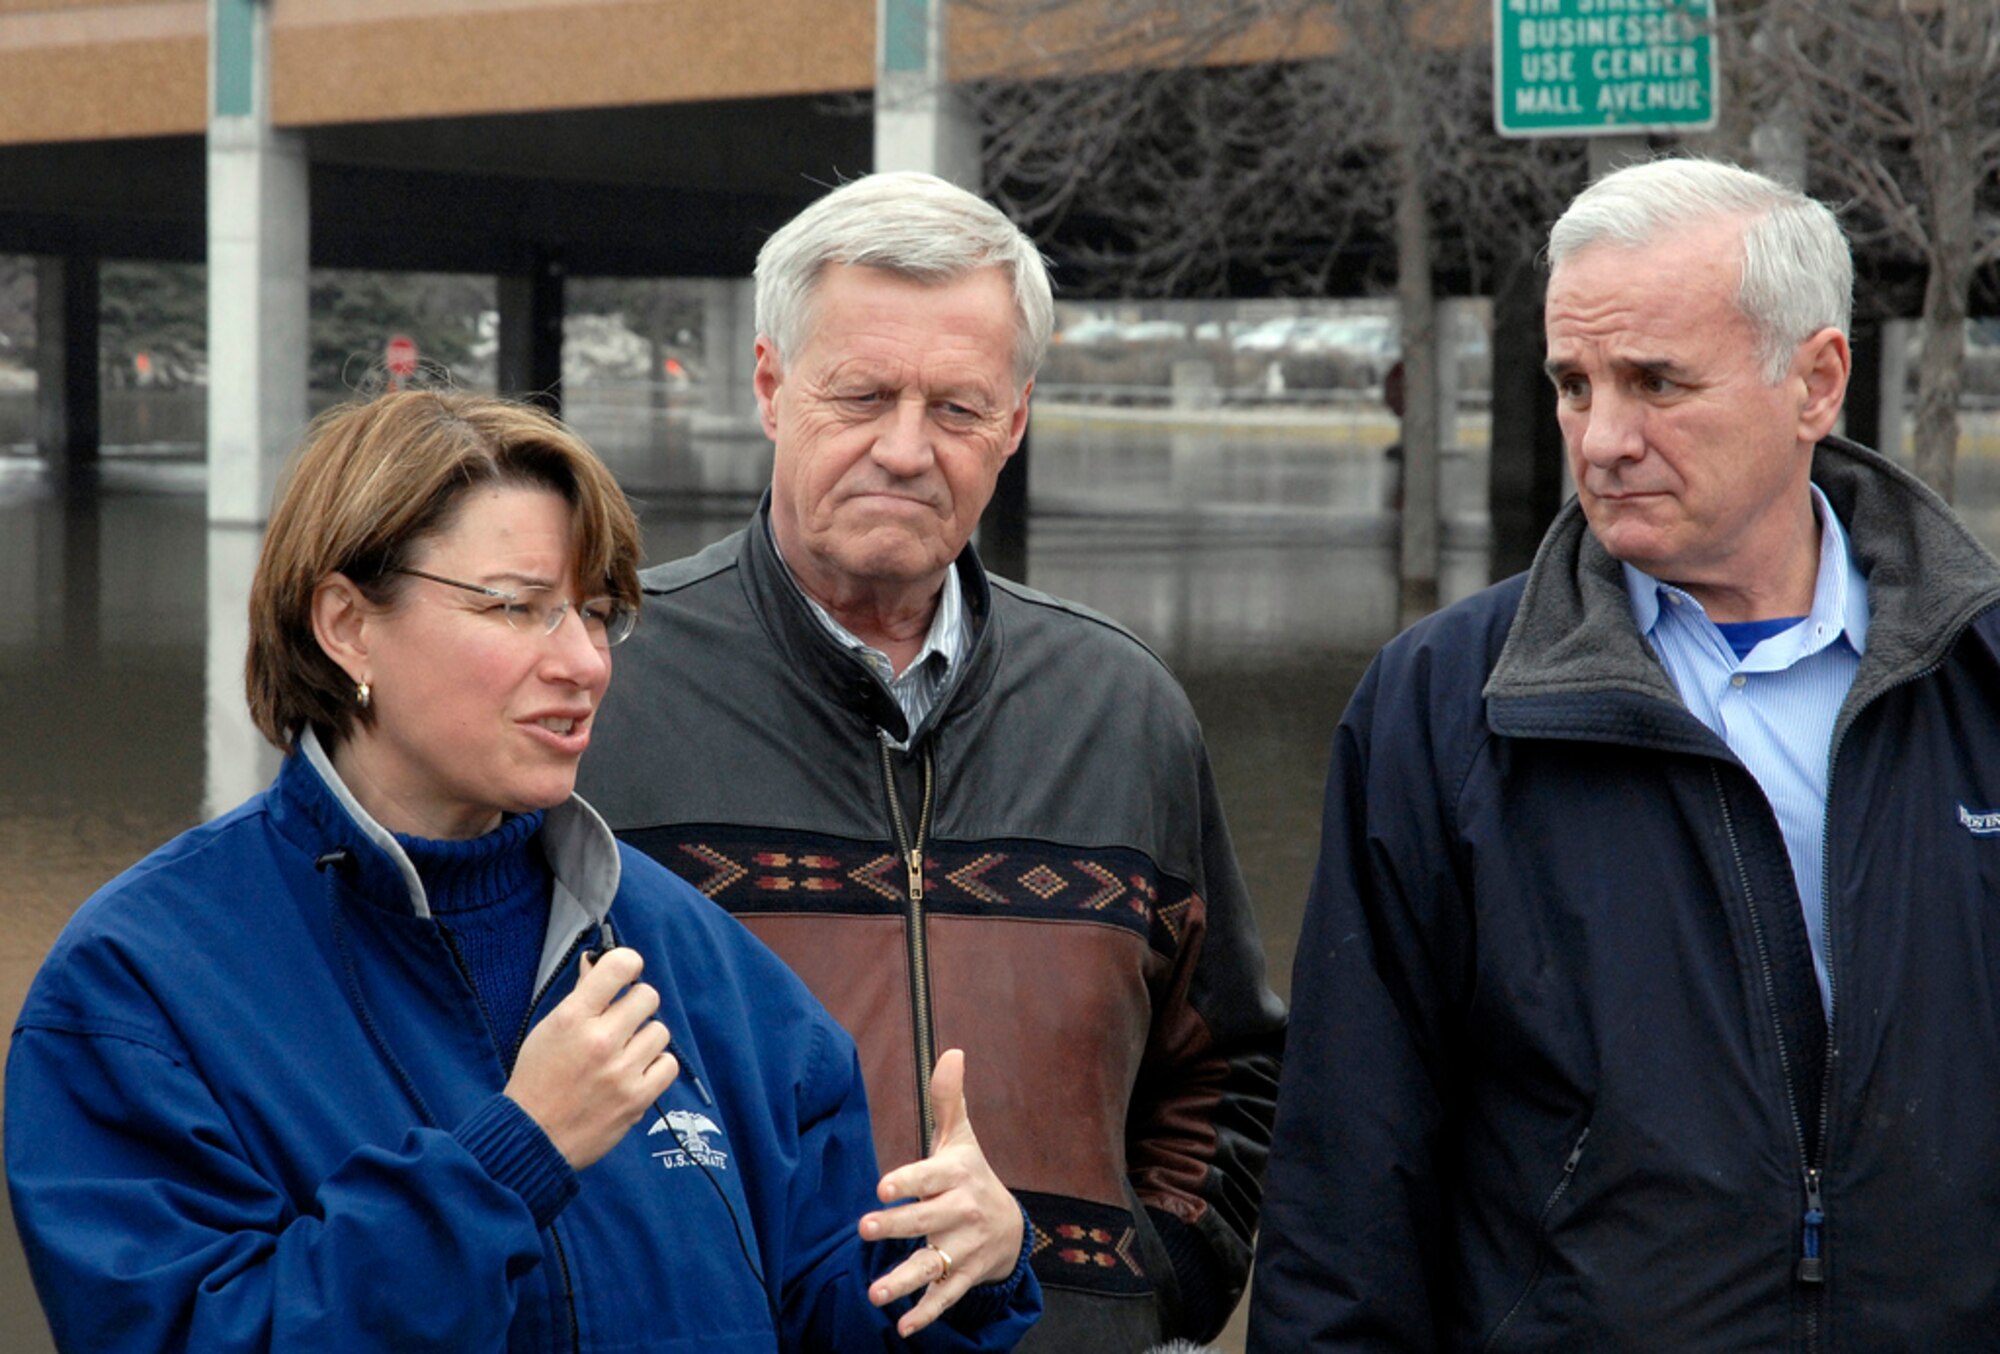 MOORHEAD, Minn. Gov. Mark Dayton, Senator Amy Klobuchar and Rep. Collin Peterson visited the Moorhead area Saturday, April 9, as the city braced for the Red River to crest.  They toured two towns to view flood preparations and discuss state flood aid with local officials.  At the direction of the governor's executive order, 200 members of the Minnesota National Guard have been activated for flood duty in western Minnesota.  Guard members are conducting levee patrols, monitoring water pumps and securing road blocks in the communities of Moorhead, Oakport and Georgetown, Minn.  